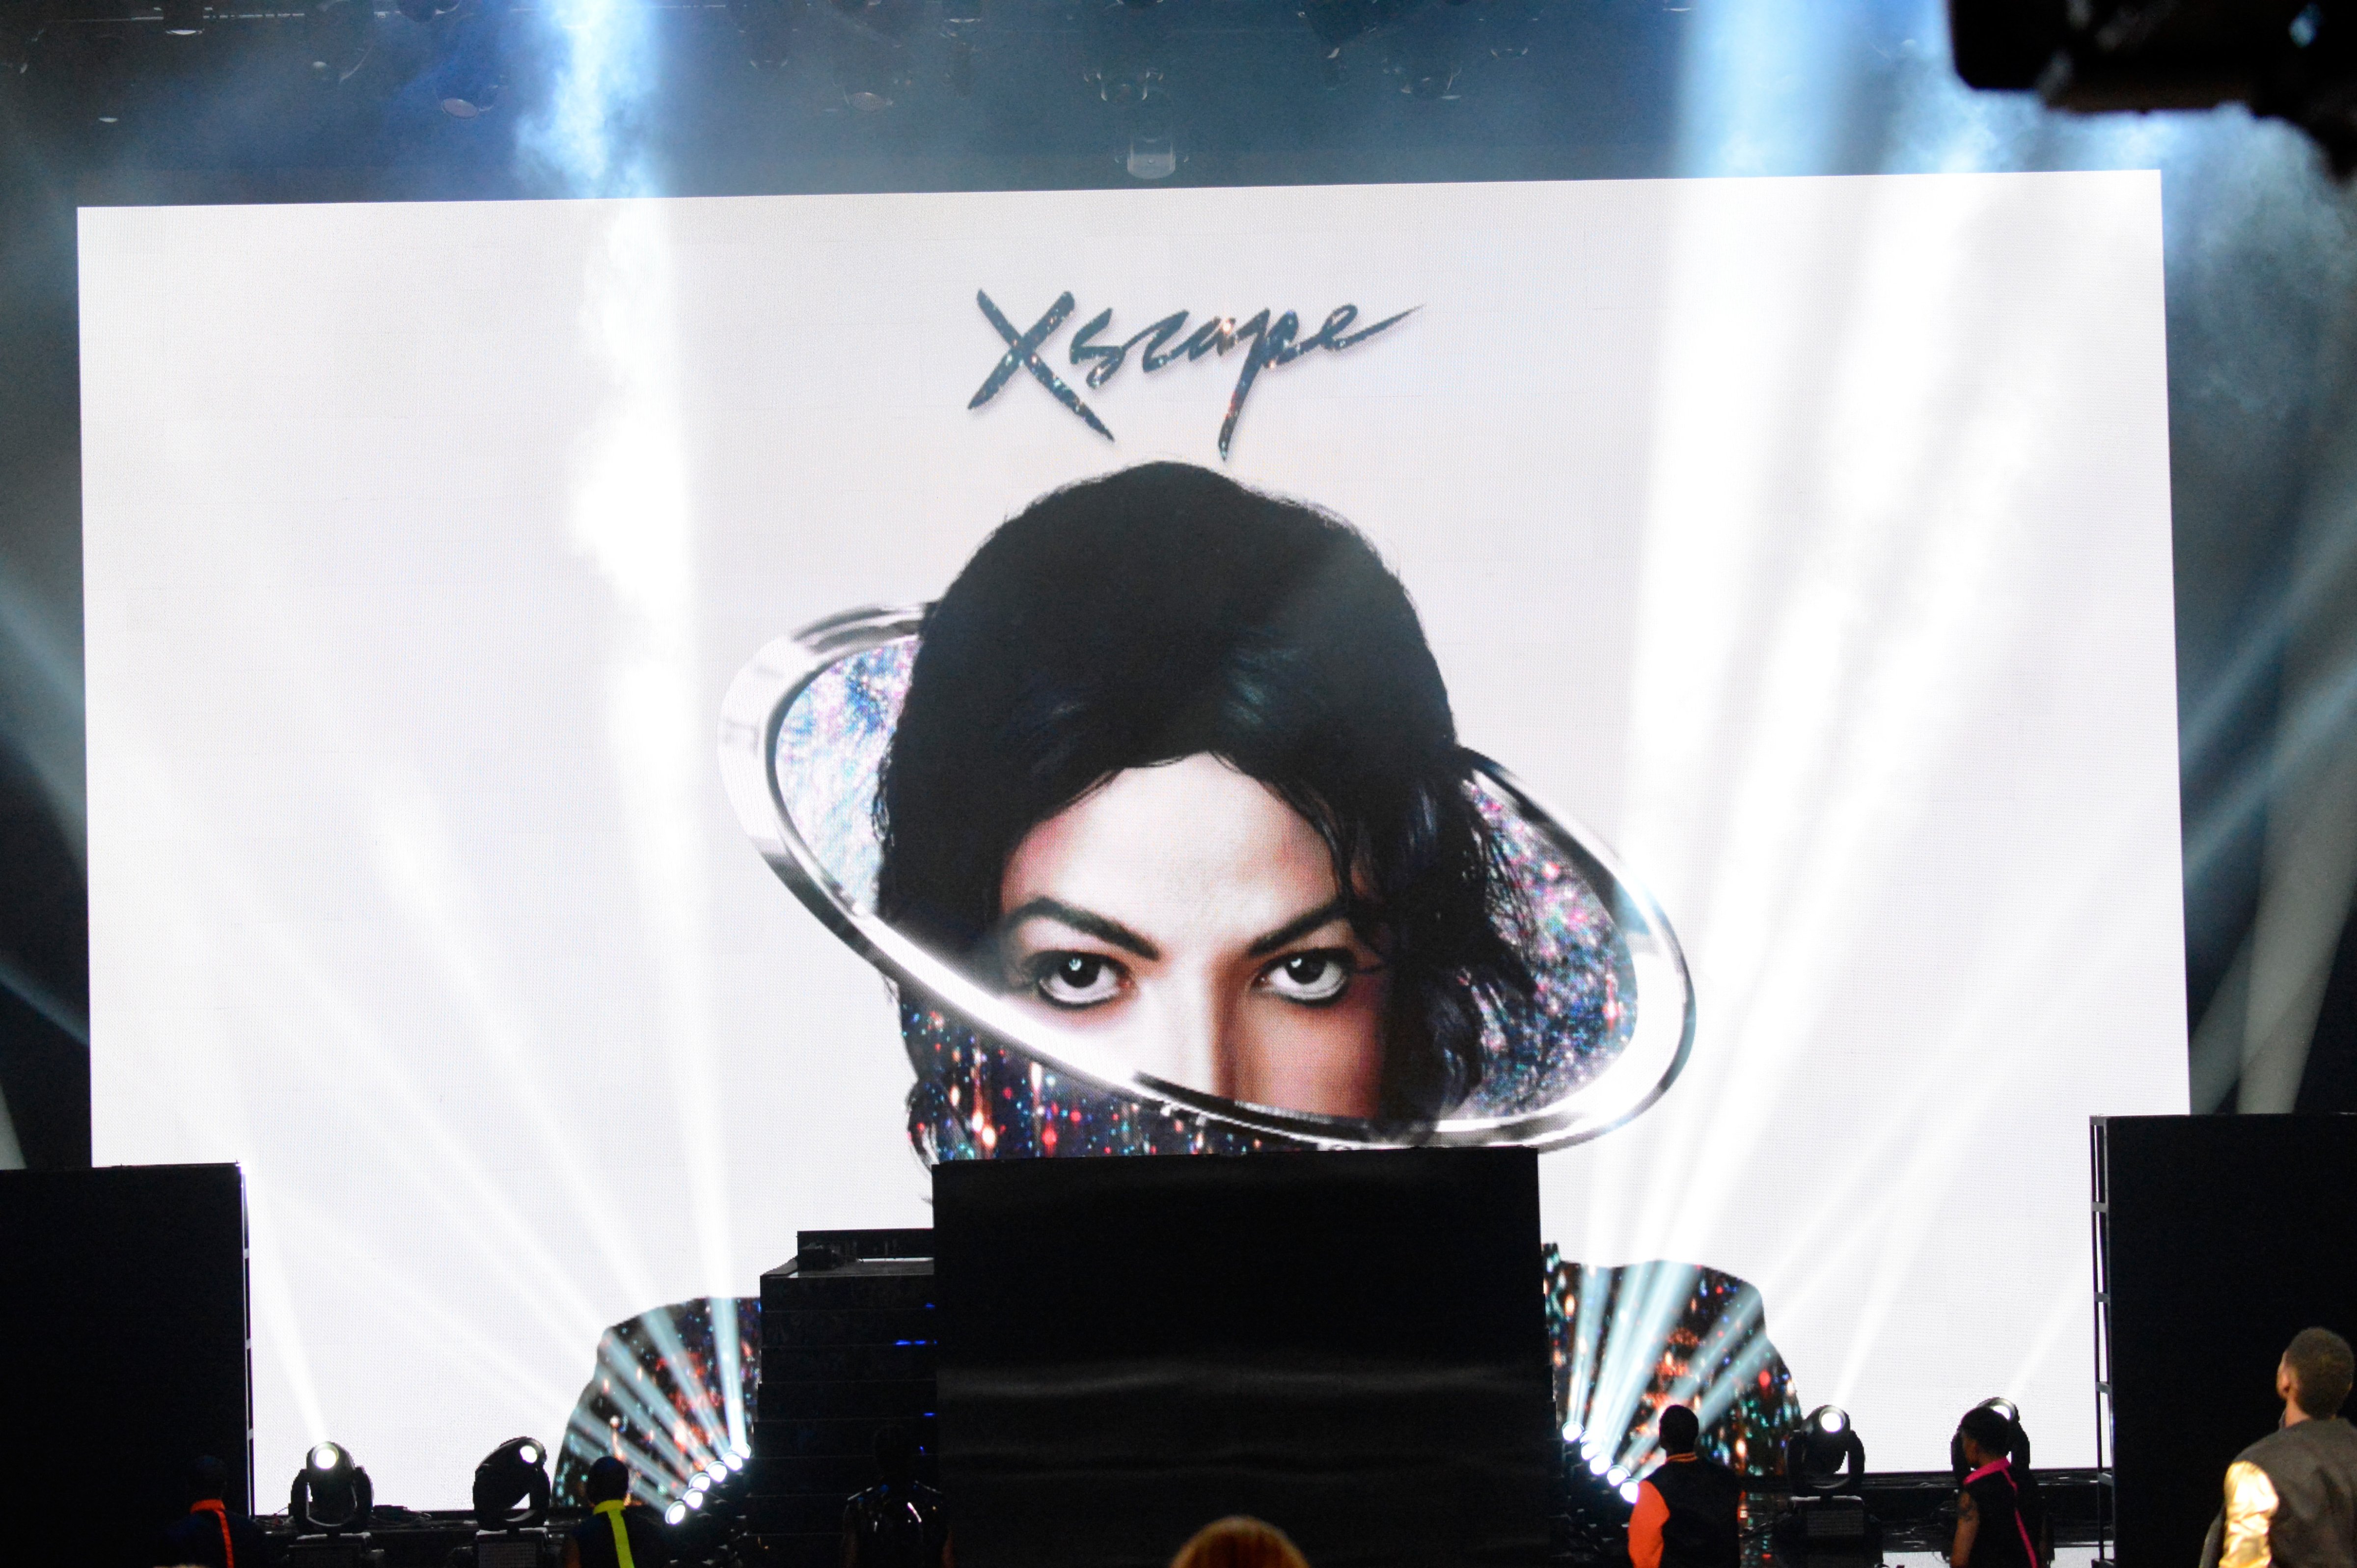 An image of the late singer Michael Jackson appears onstage during the 2014 iHeartRadio Music Awards held at The Shrine Auditorium on May 1, 2014 in Los Angeles, California. (Kevin Mazur)